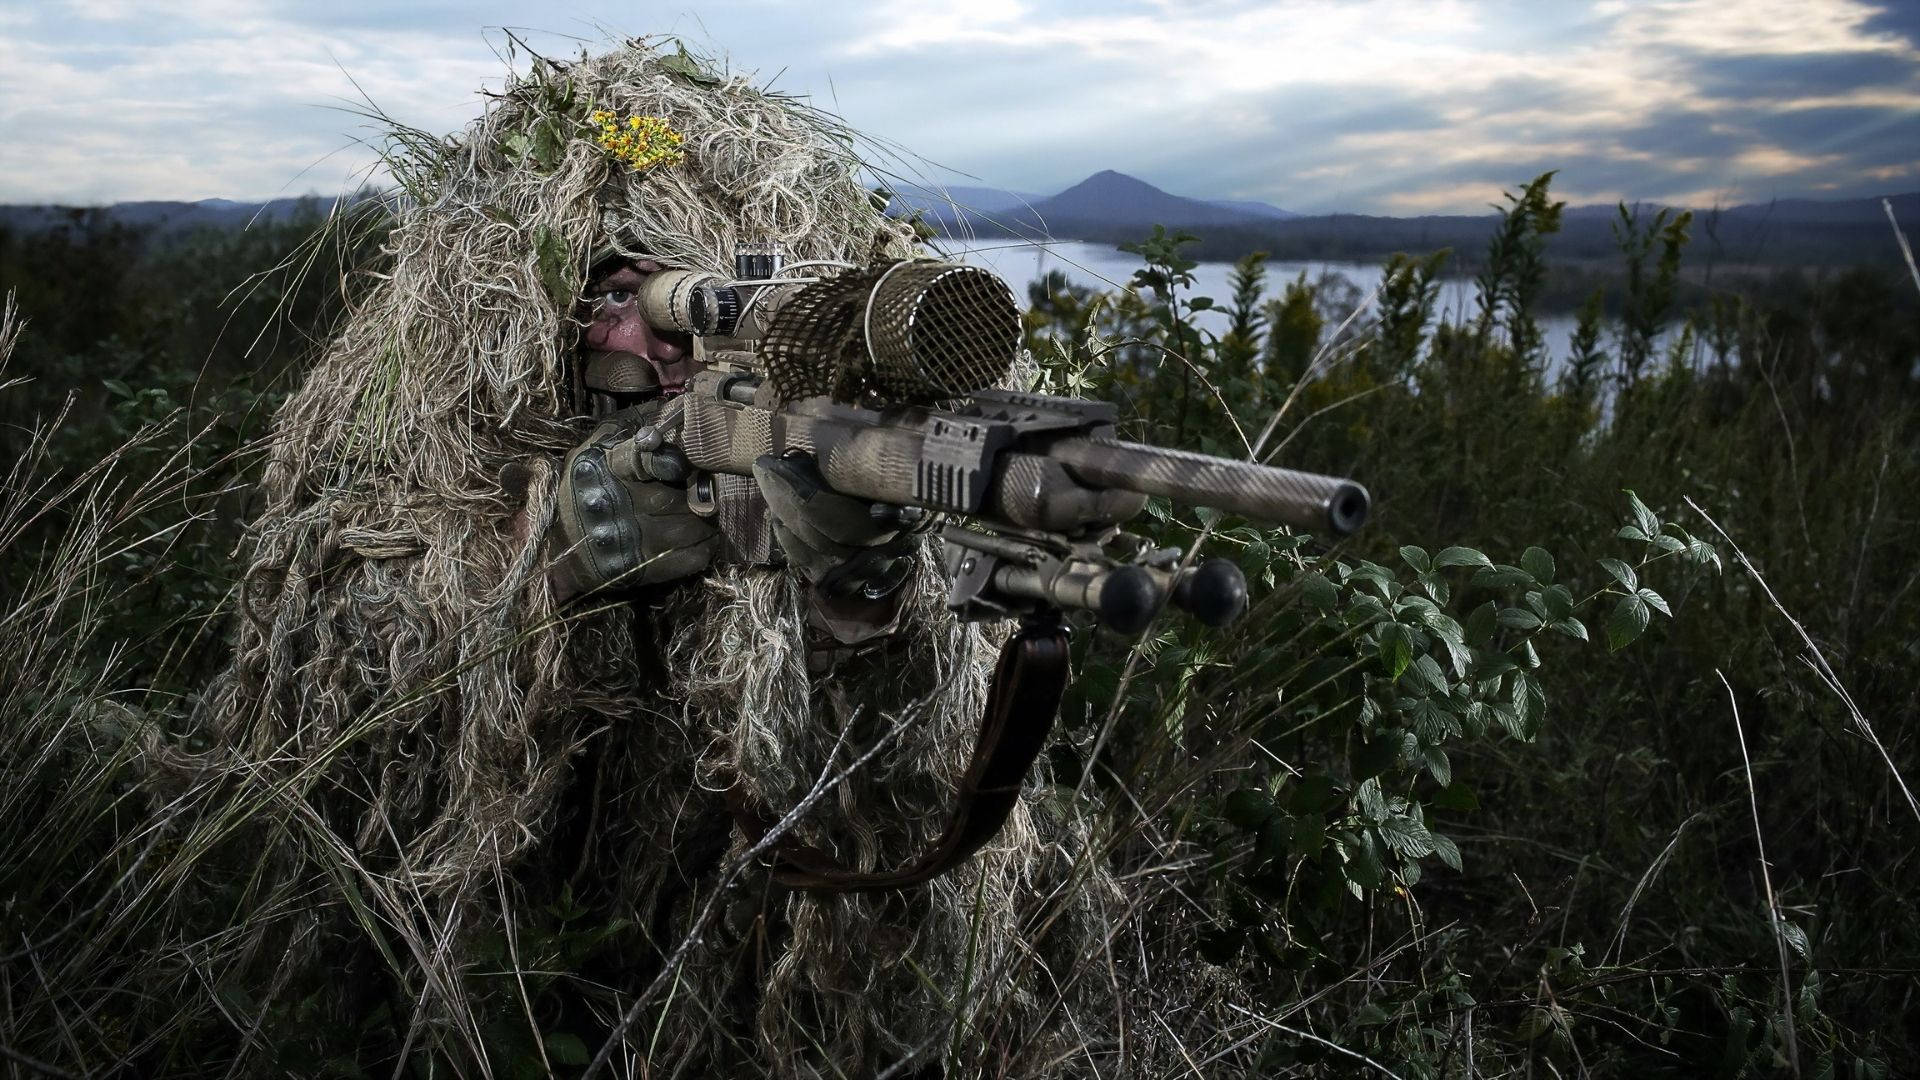 Full Camo Soldier Holding A Sniper